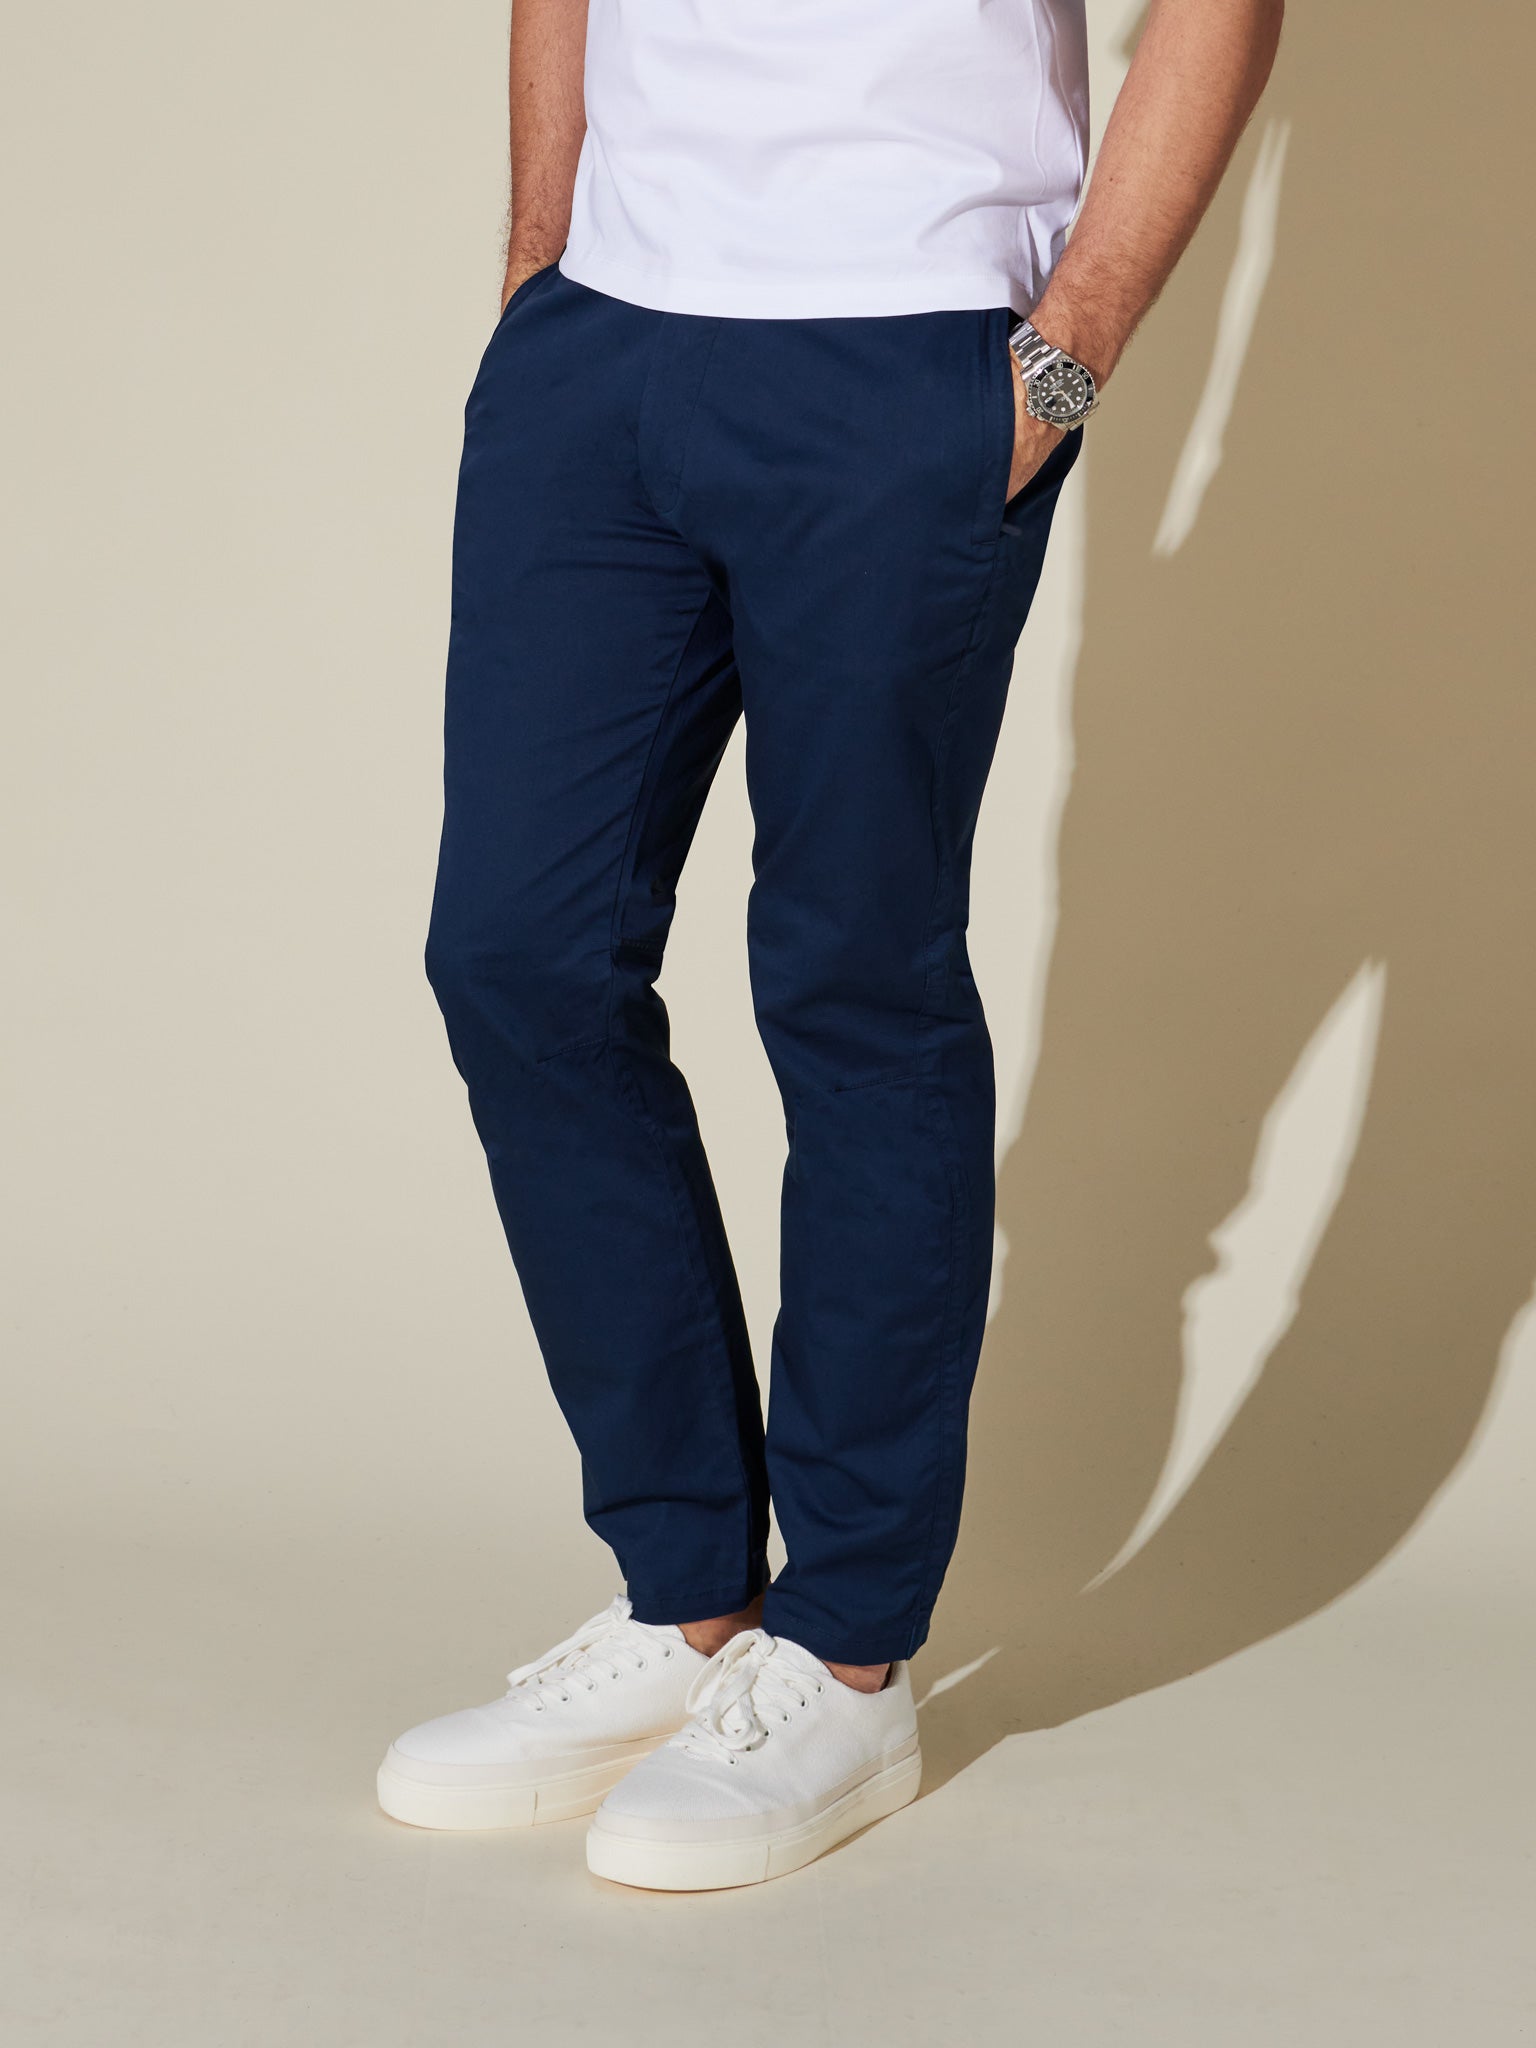 Shop Lightweight Chinos for Men in the UK | Travel Trousers Selection